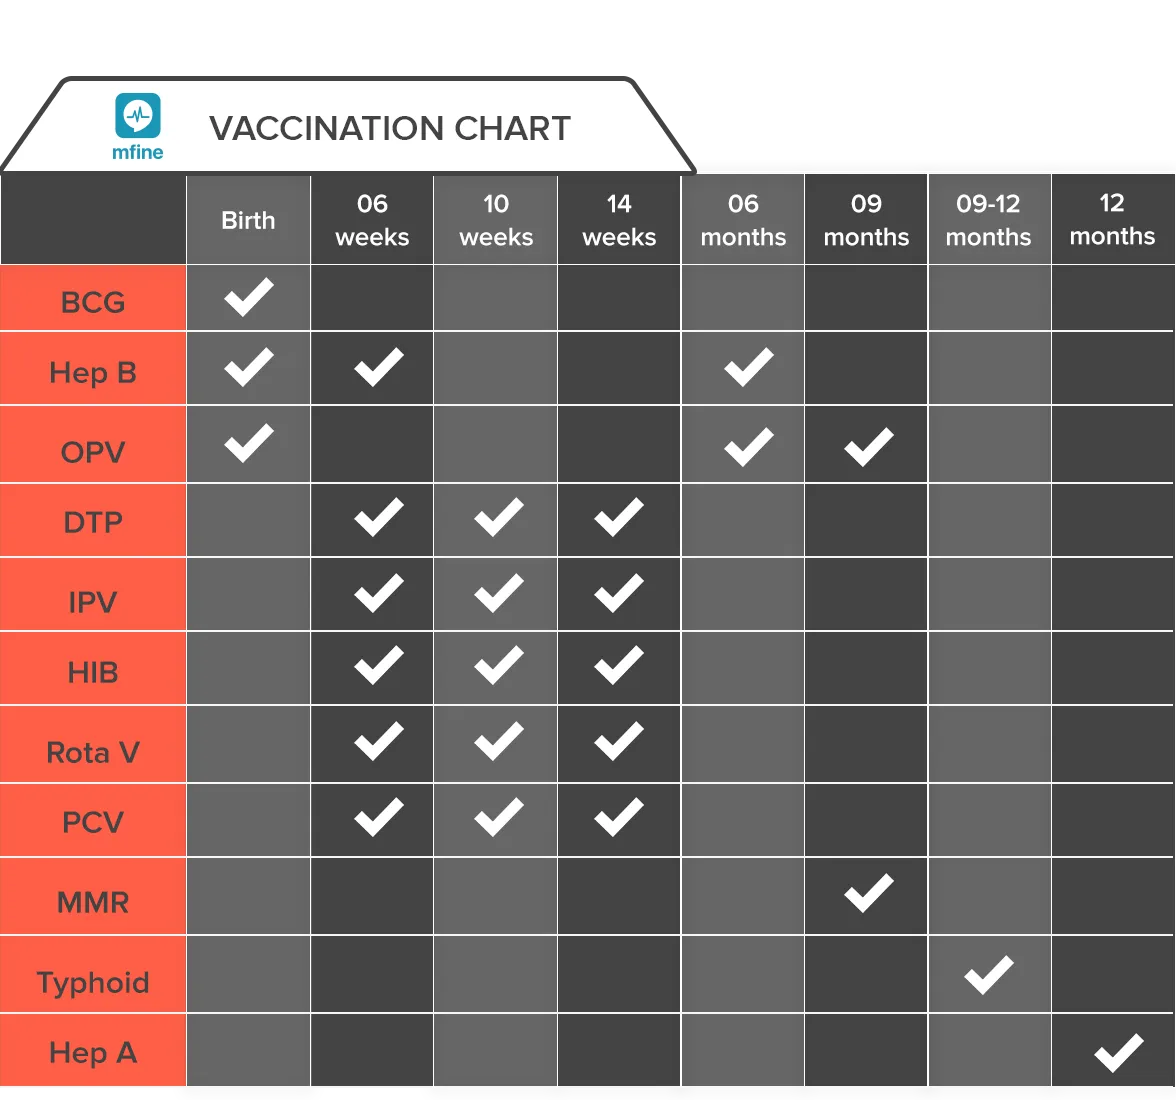 Vaccination Chart for babies in India <Downloadable>: Updated 2020